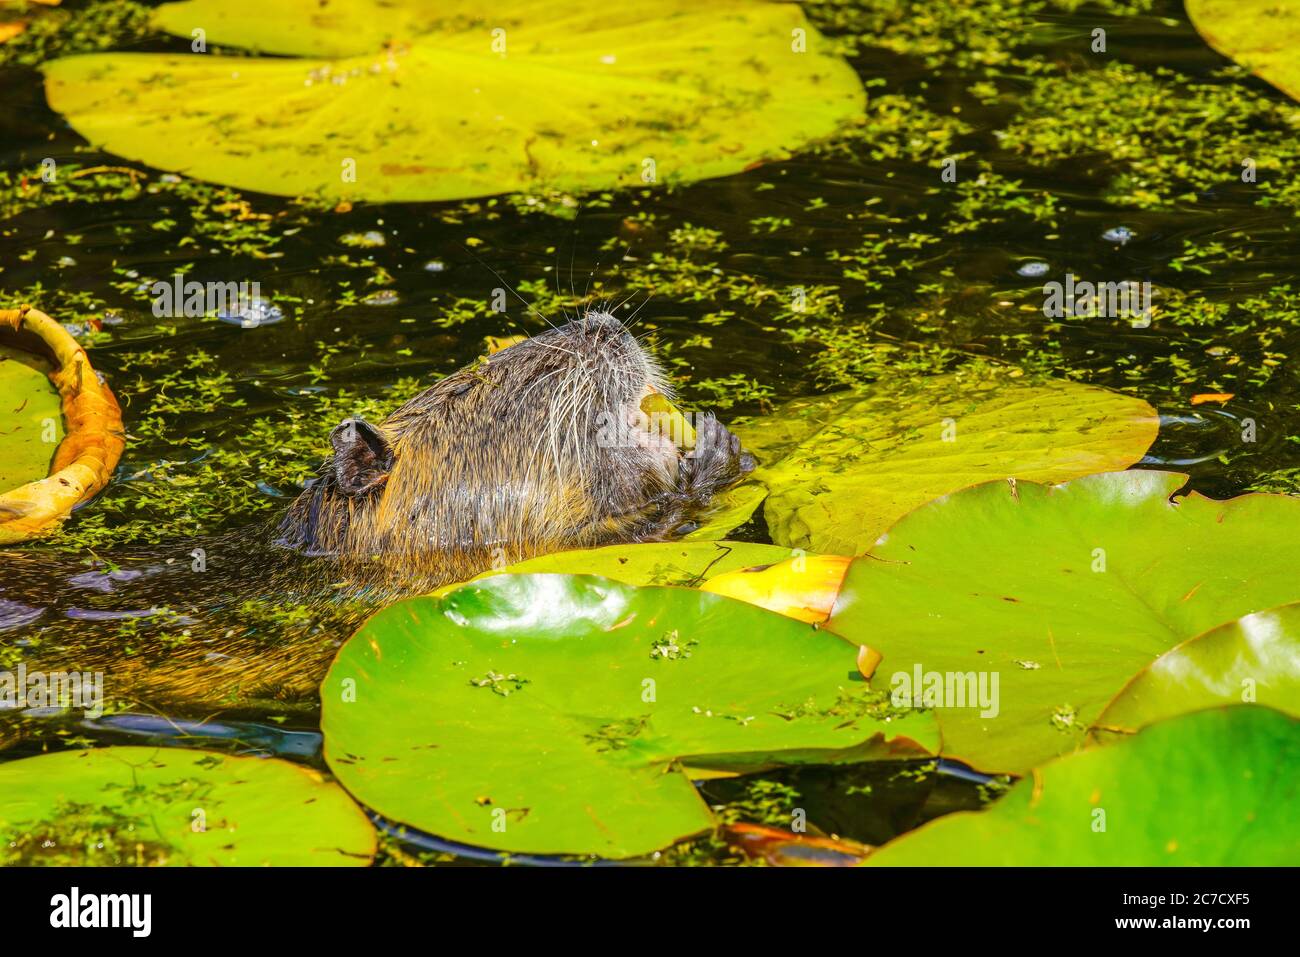 The coypu eating. Coypu is a large, herbivorous, semiaquatic rodent. Member of the family Myocastoridae included within Echimyidae, the family of the Stock Photo